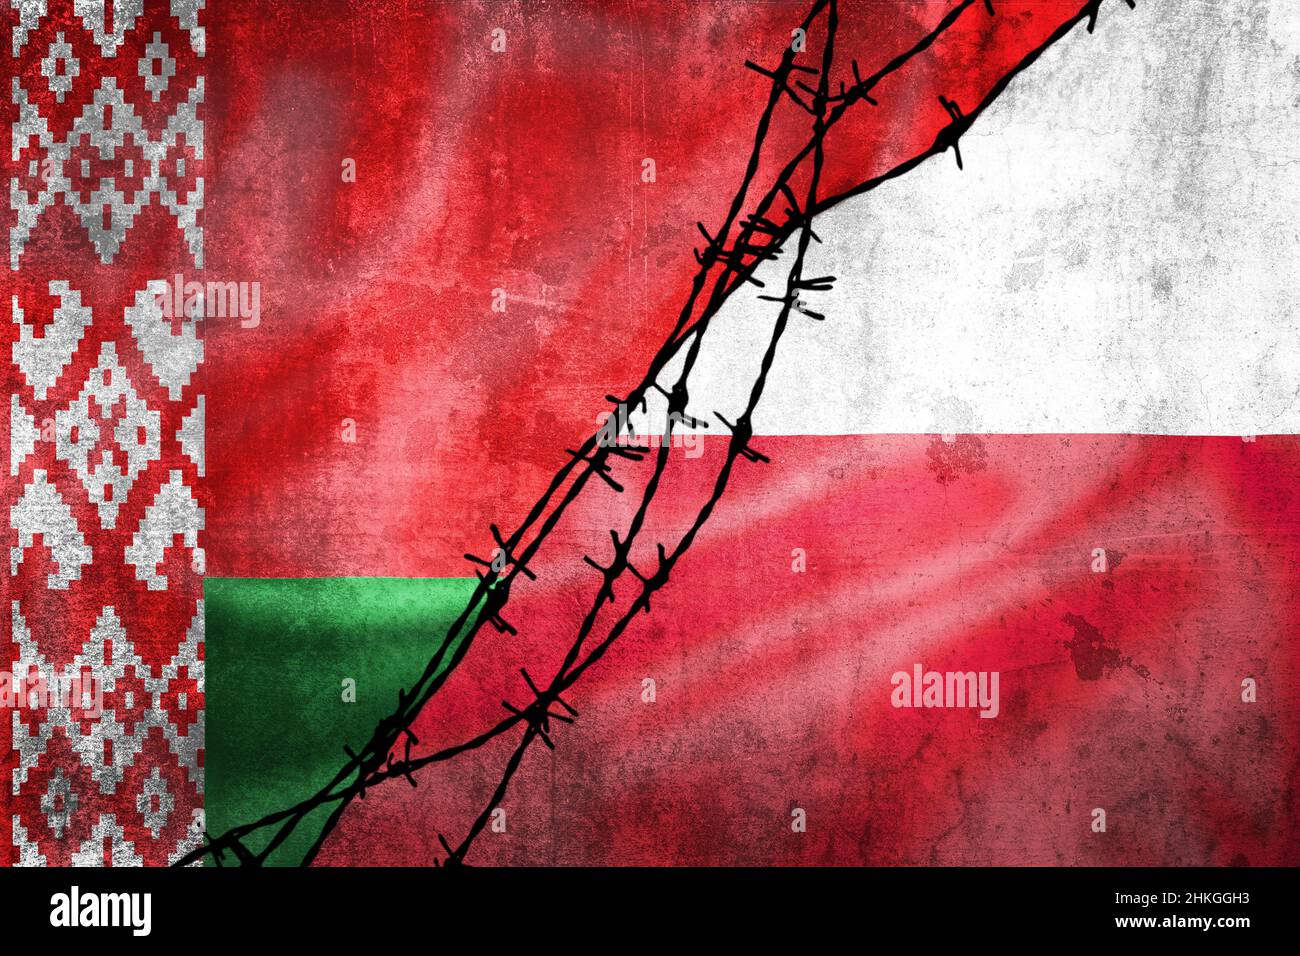 Grunge flags of Belarus and Poland divided by barb wire illustration, concept of tense relations in migrant border crisis Stock Photo